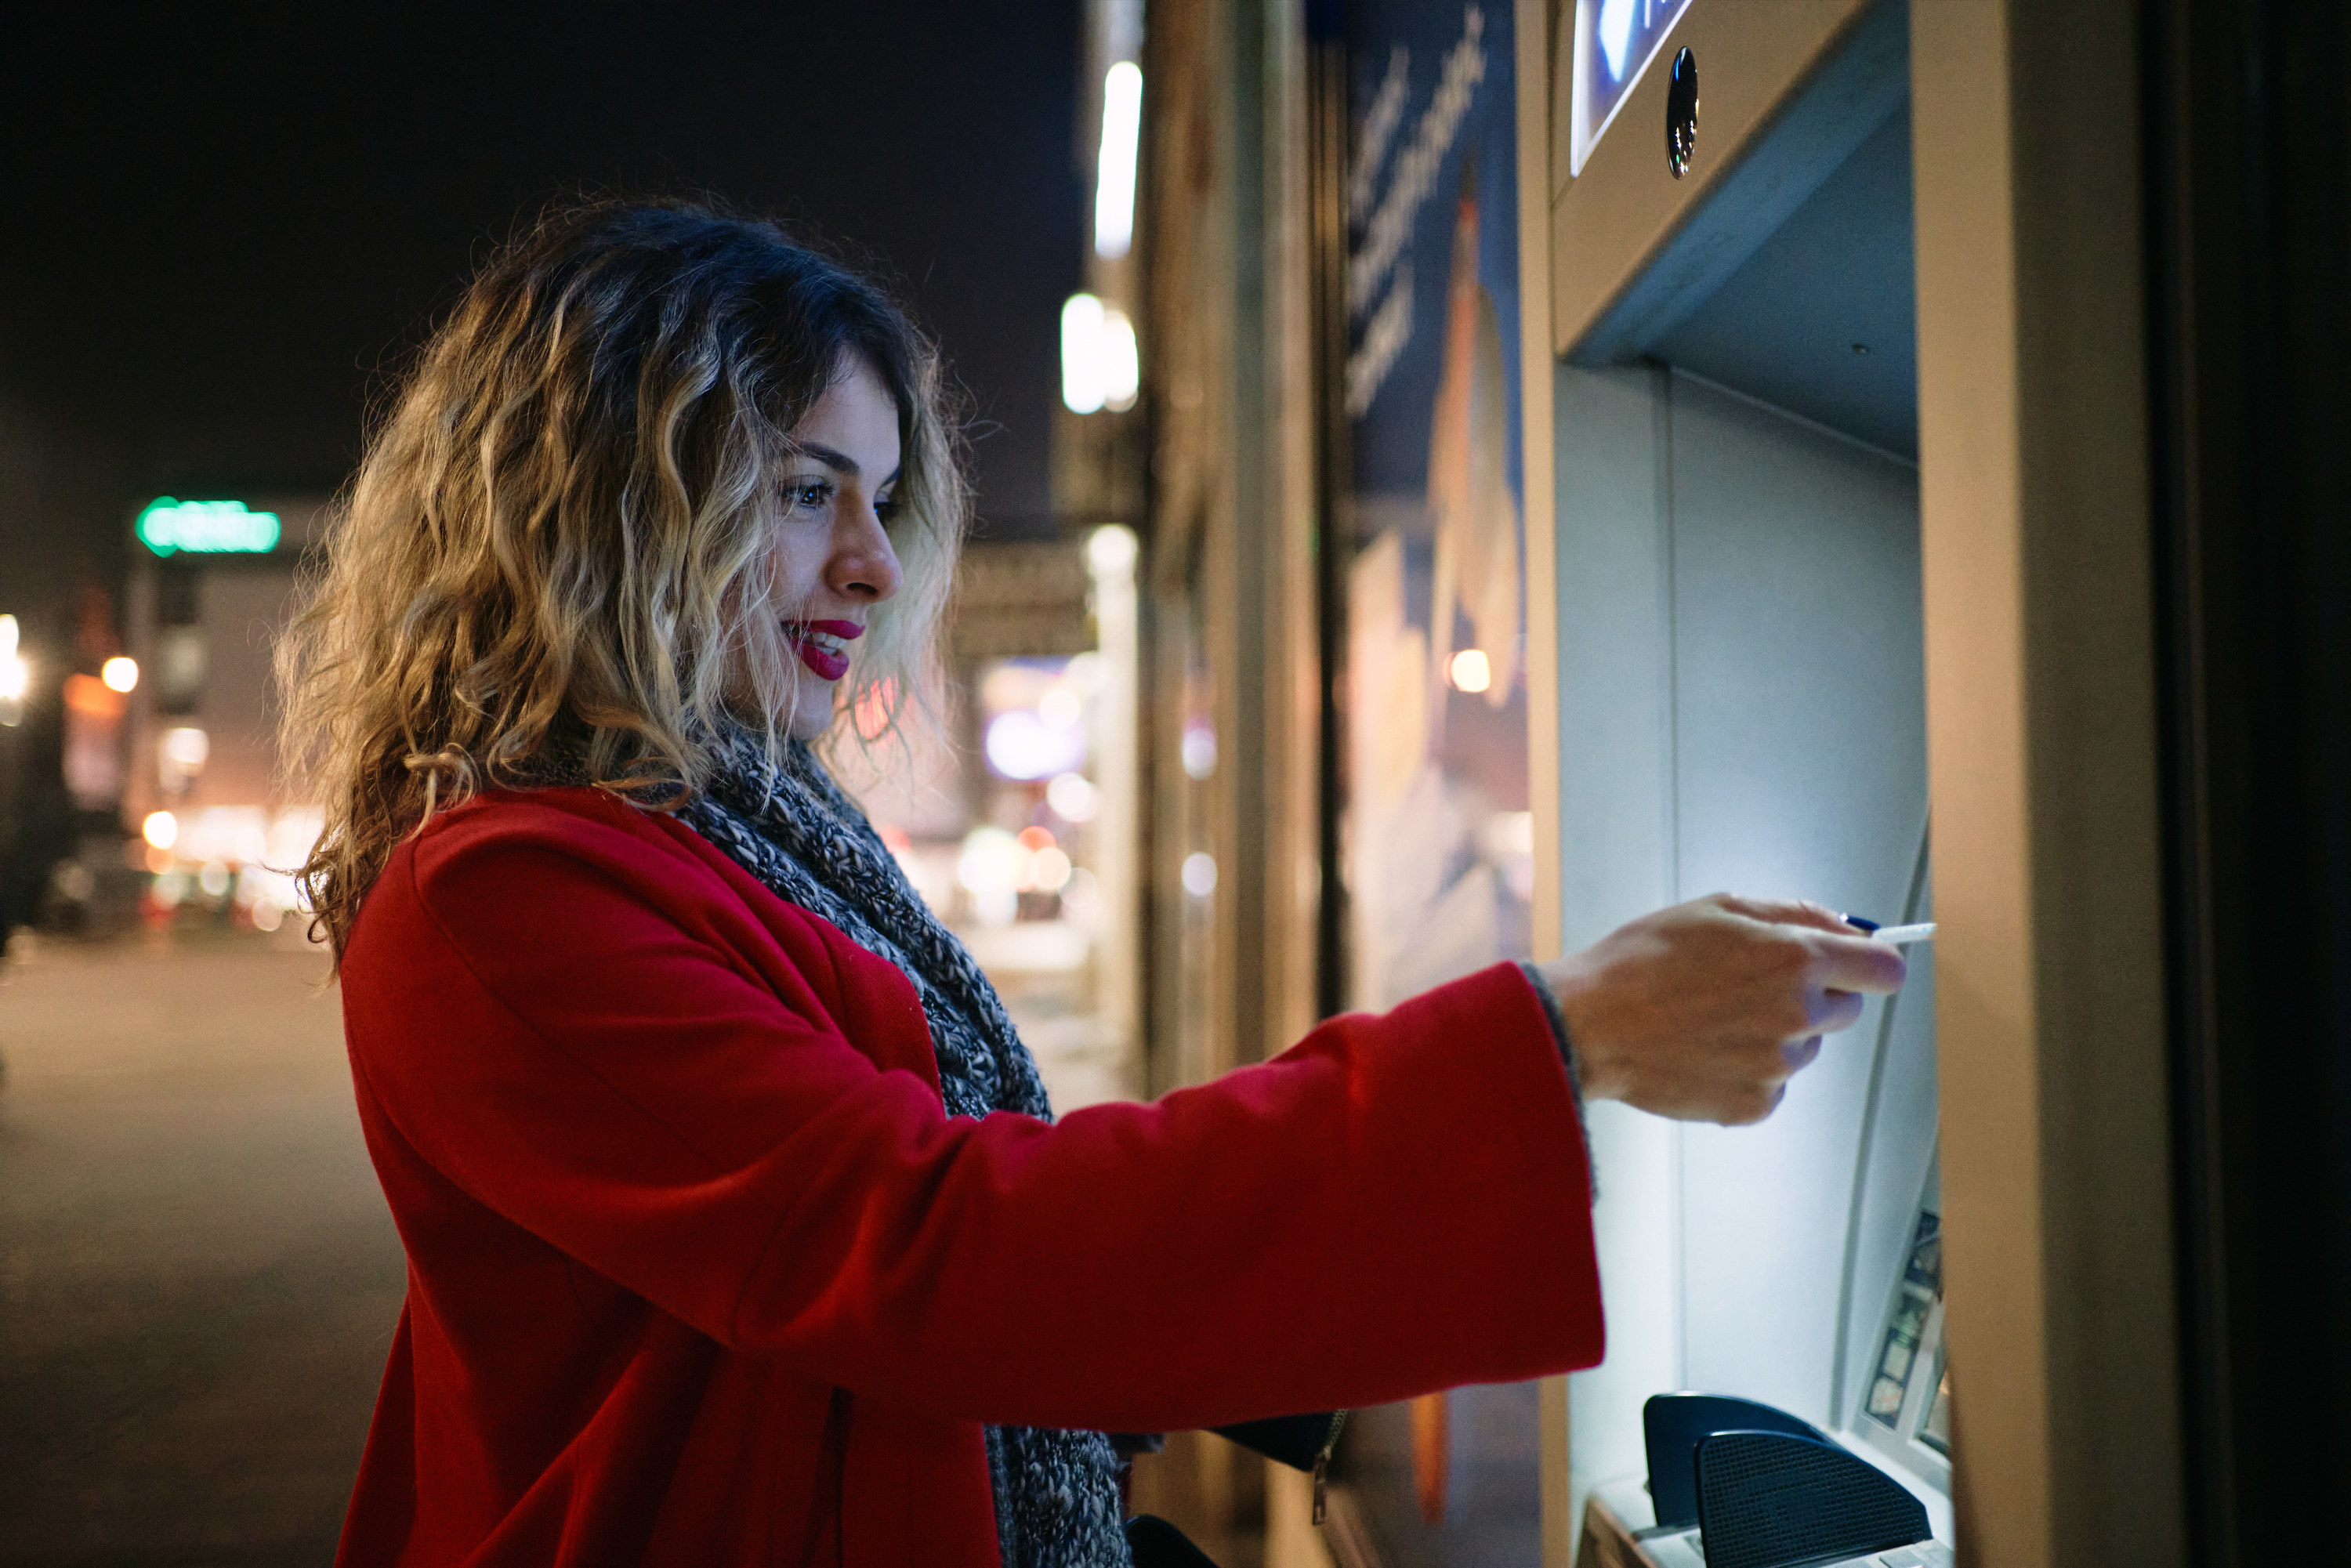 A woman at an ATM